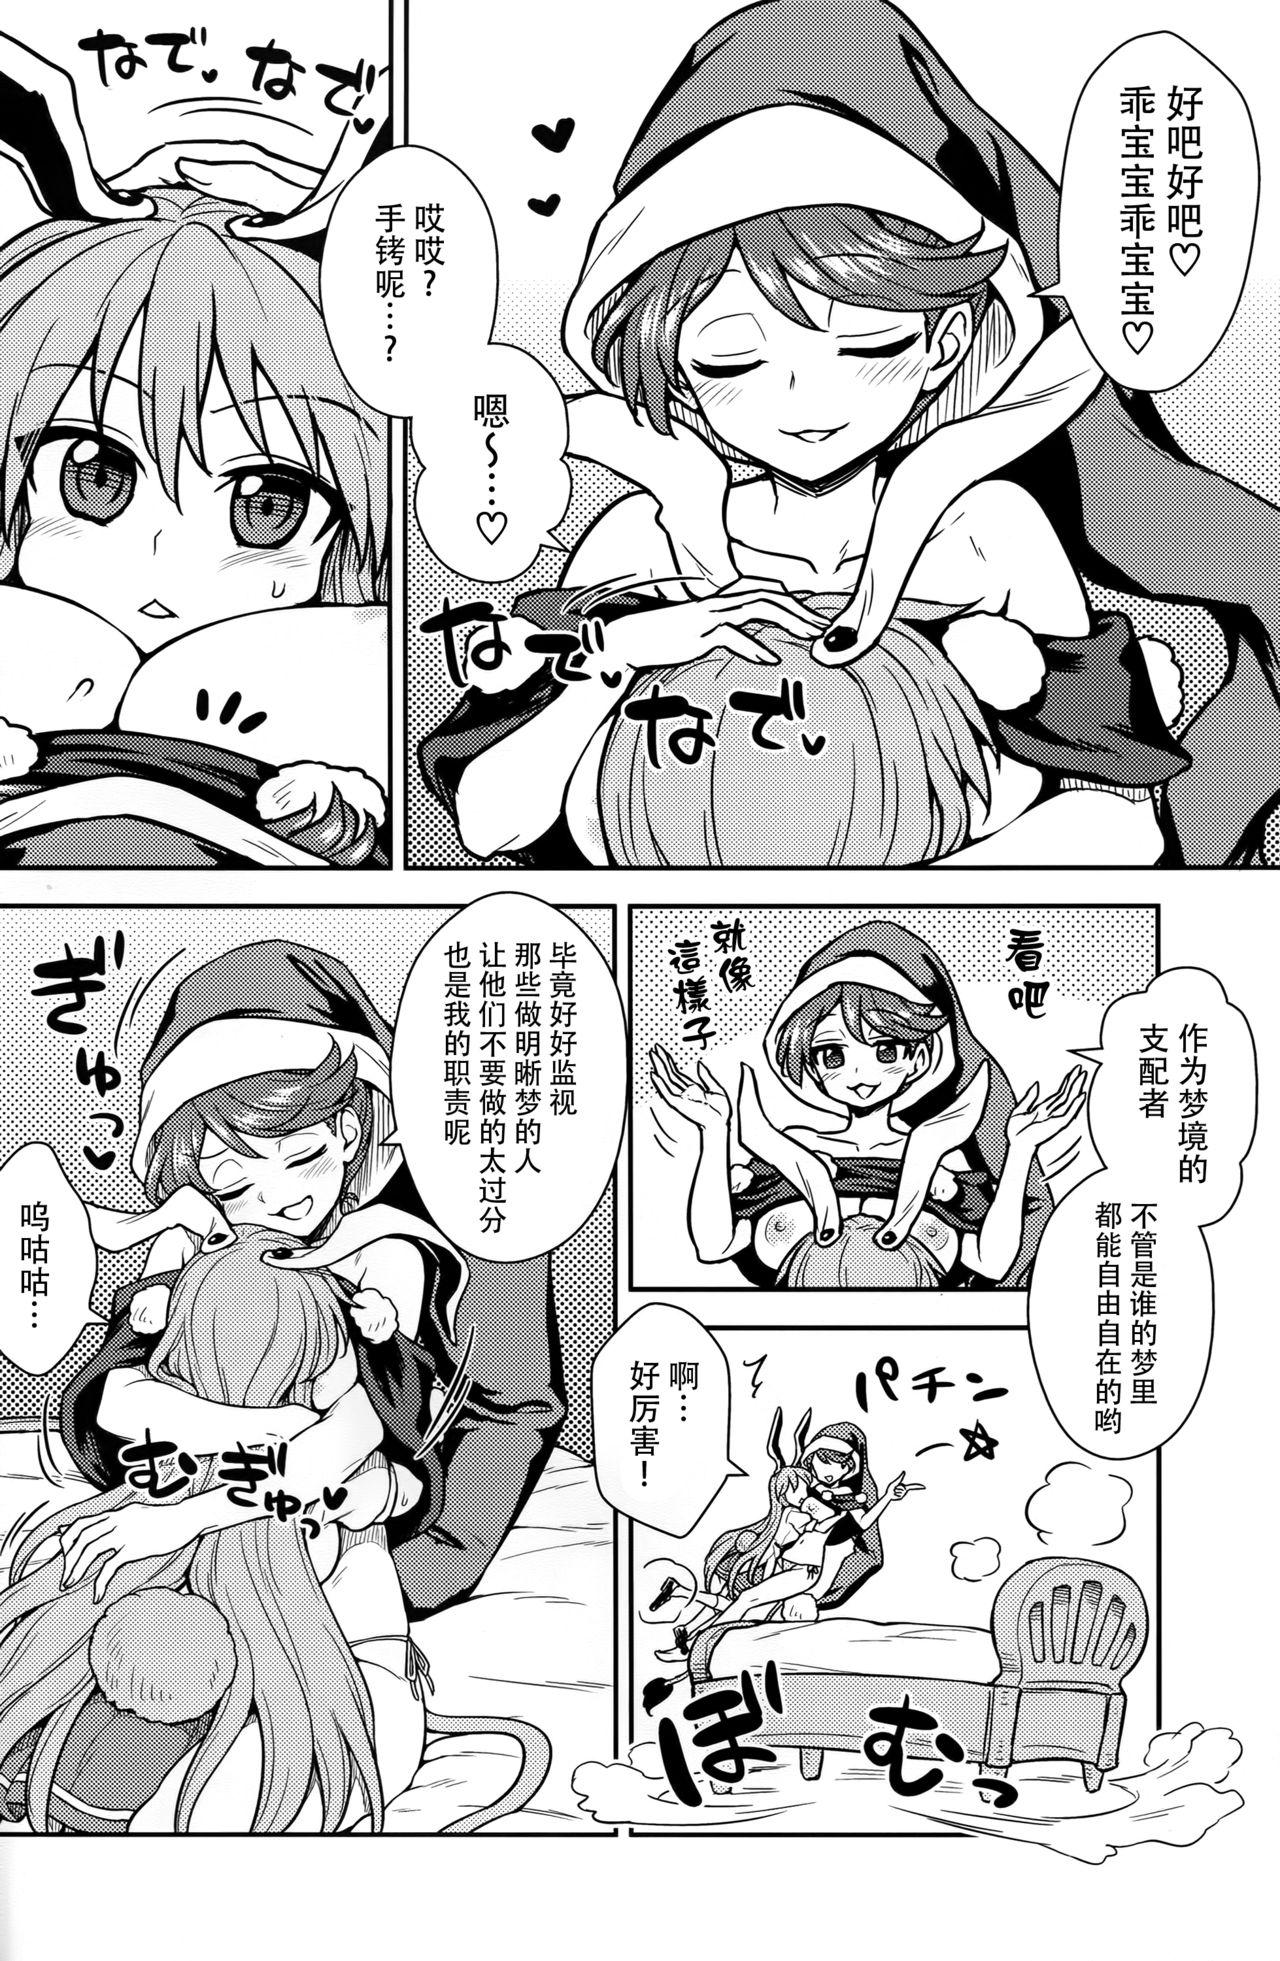 Sofa Doremy-san no Dream Therapy - Touhou project Sissy - Page 6